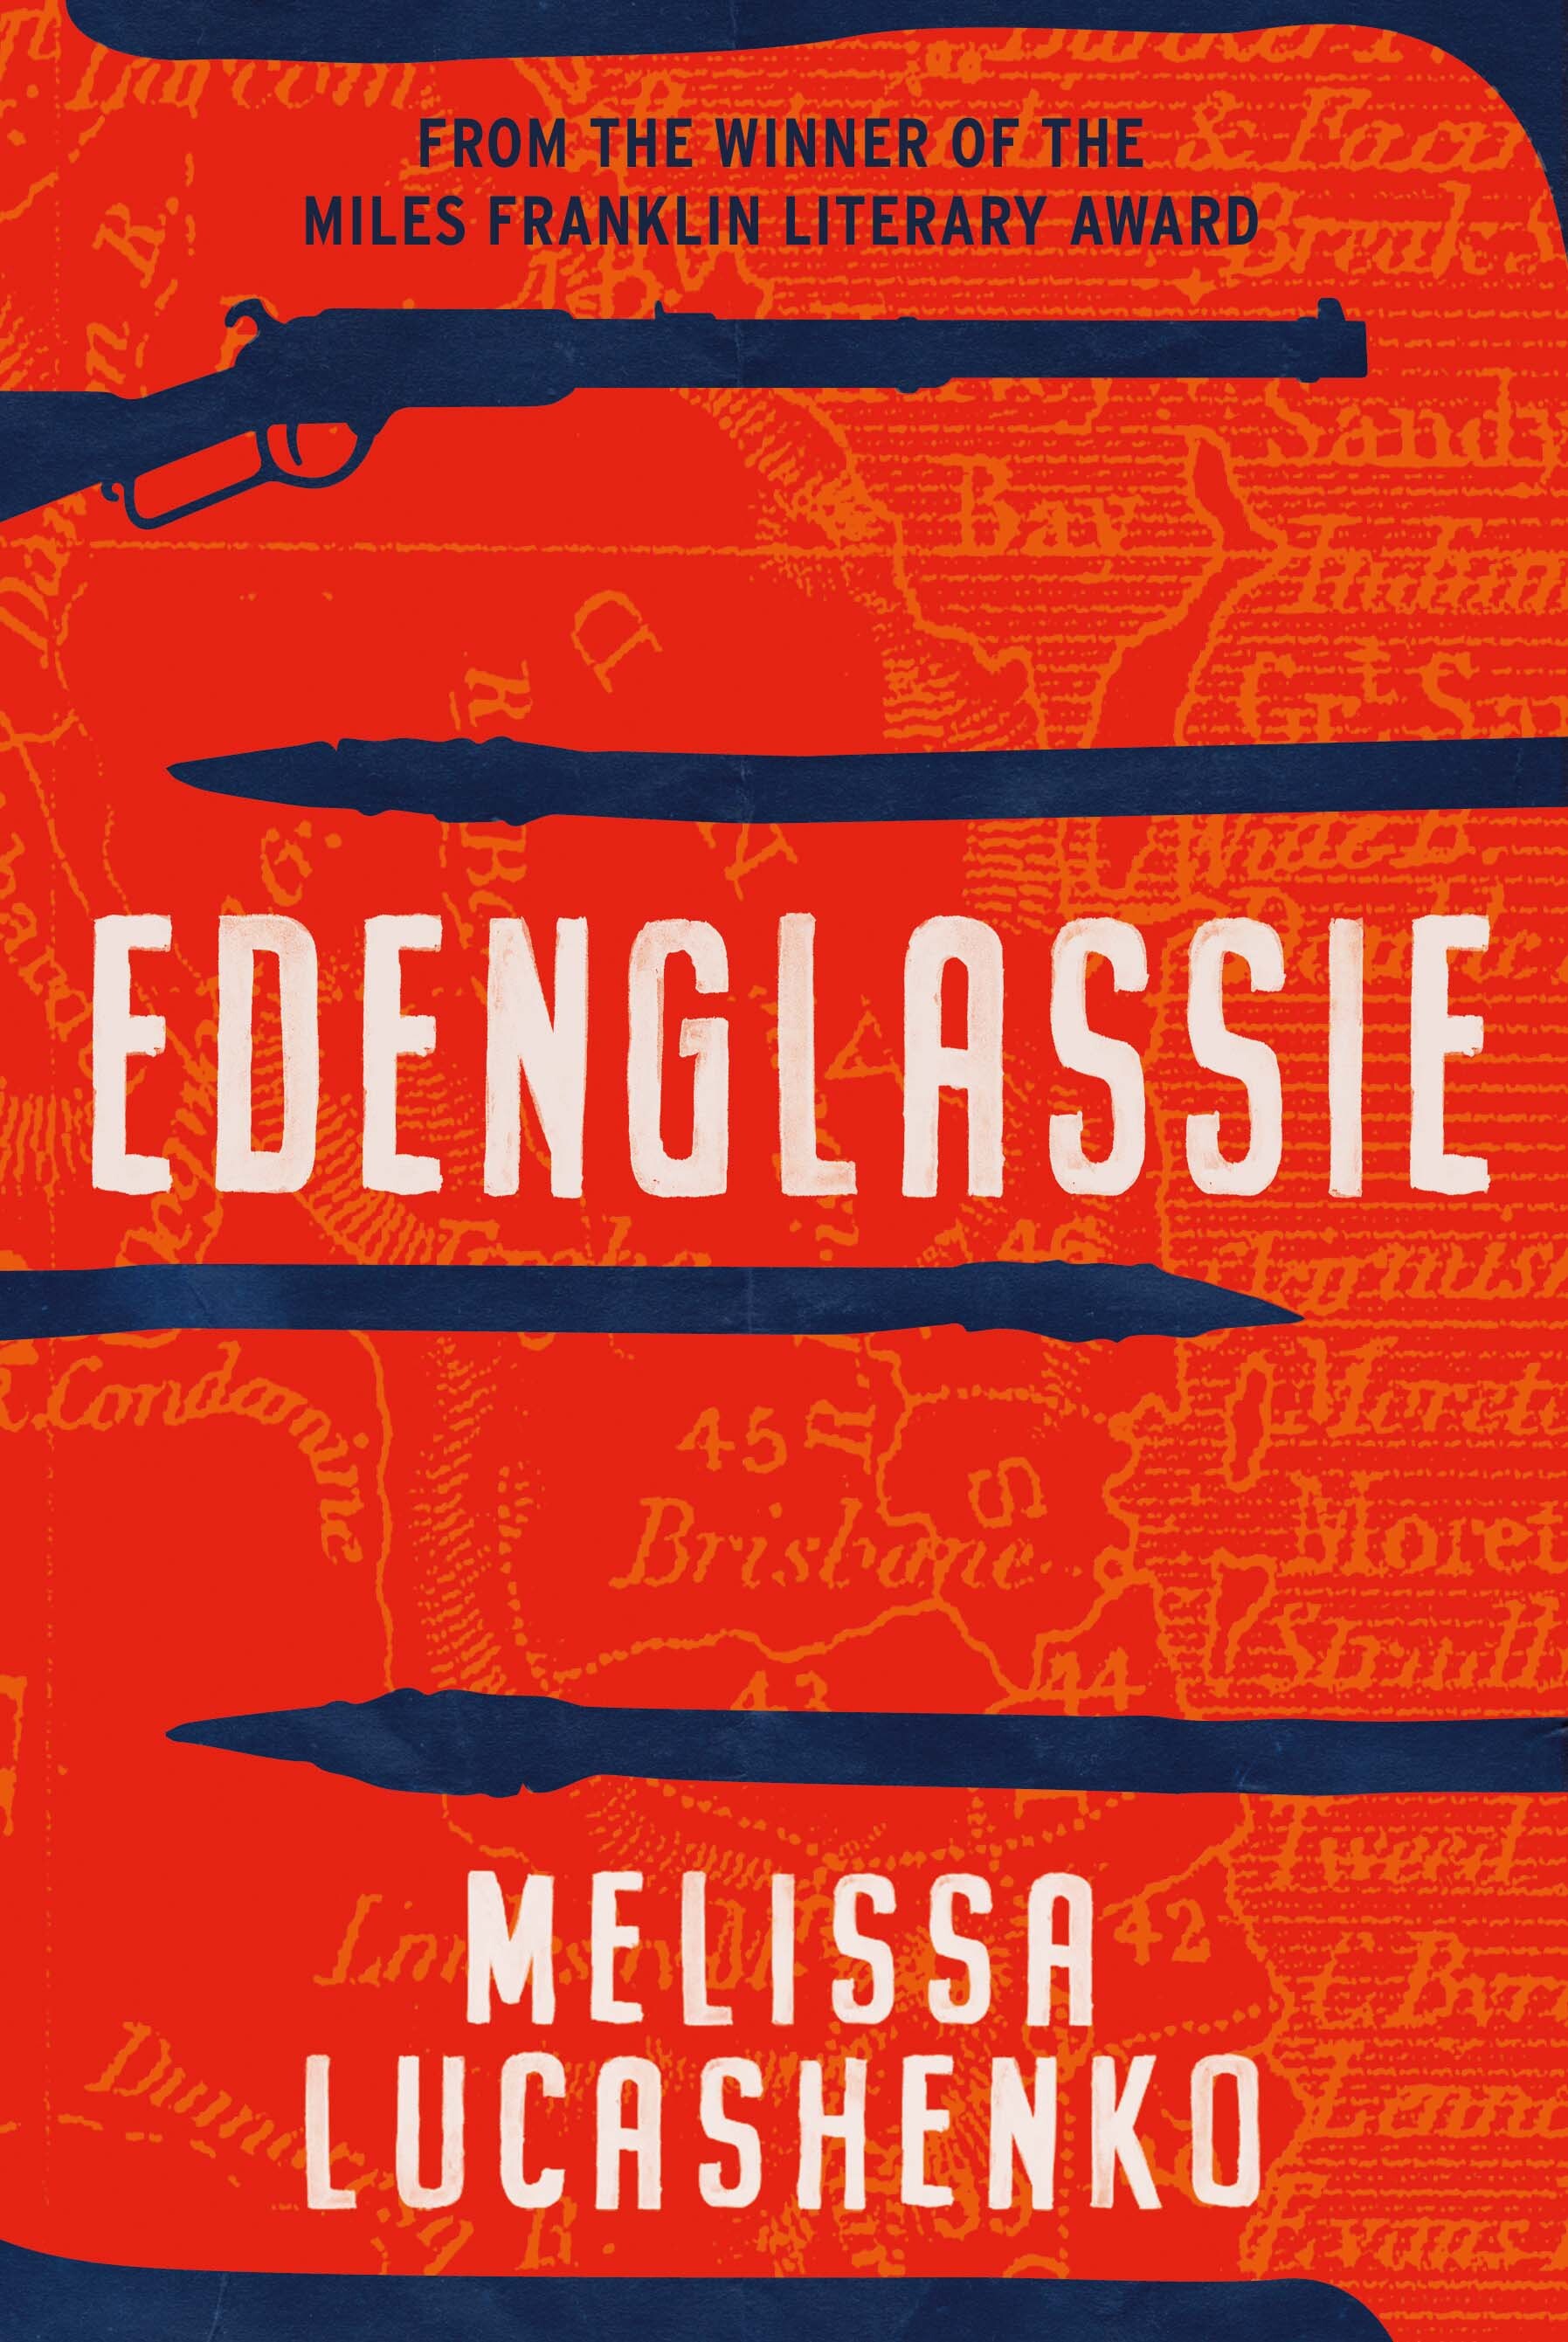 A book cover showing weapons silhouetted against a red background